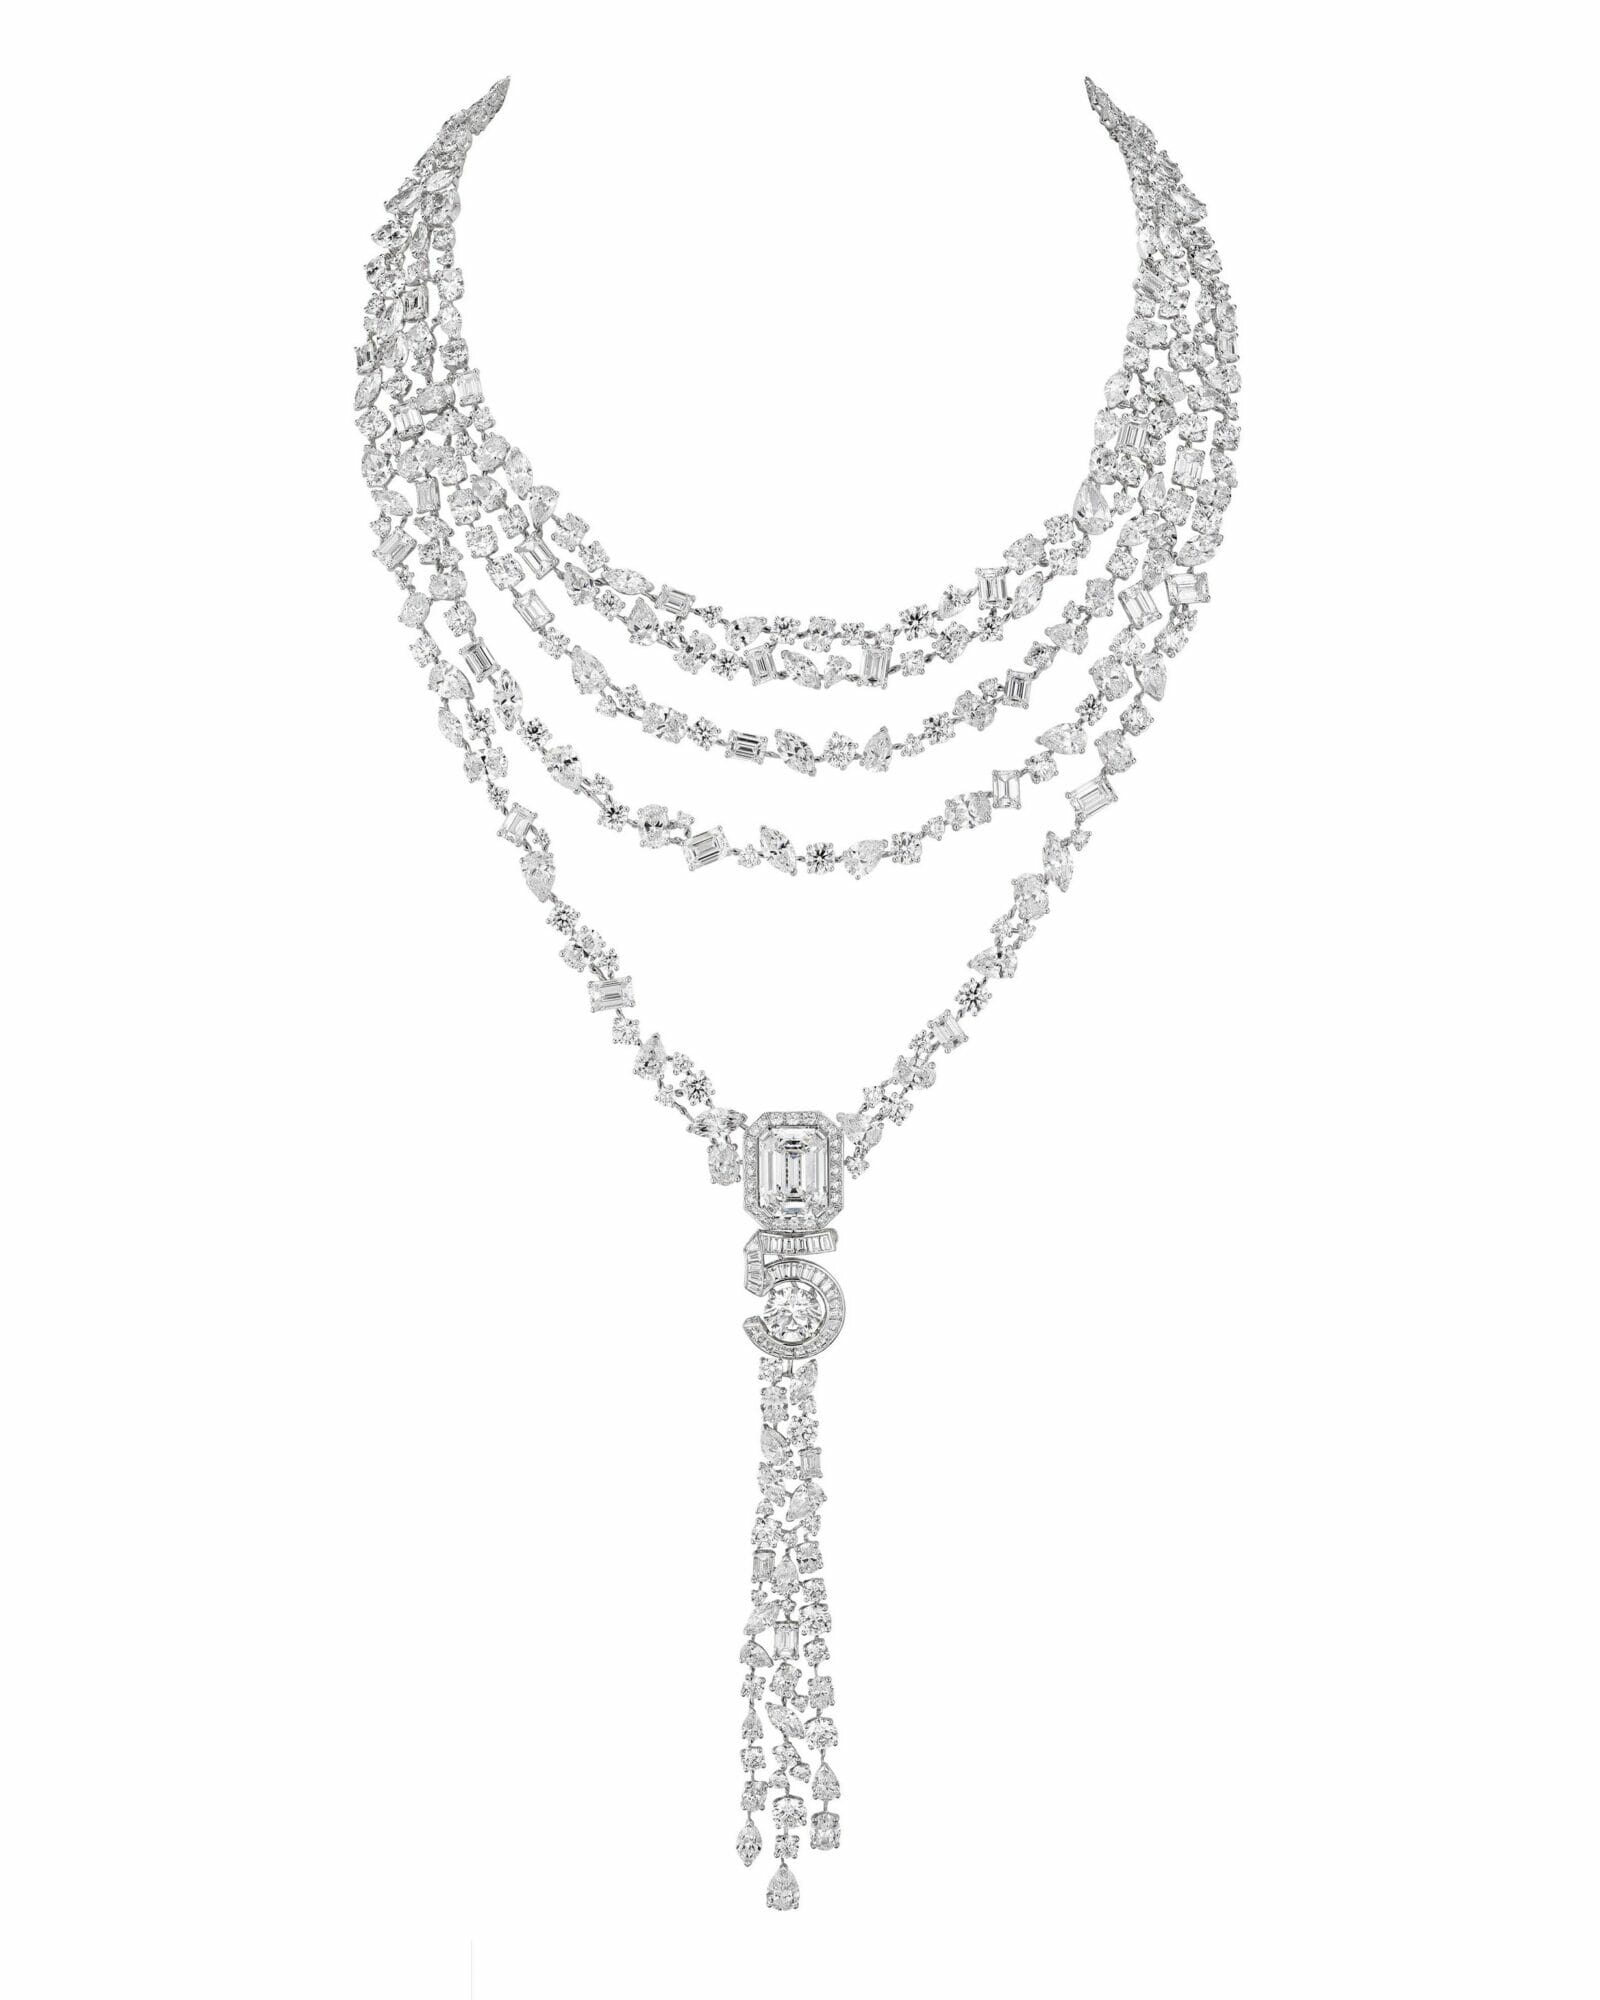 CHANEL High Jewelry Collection N°5